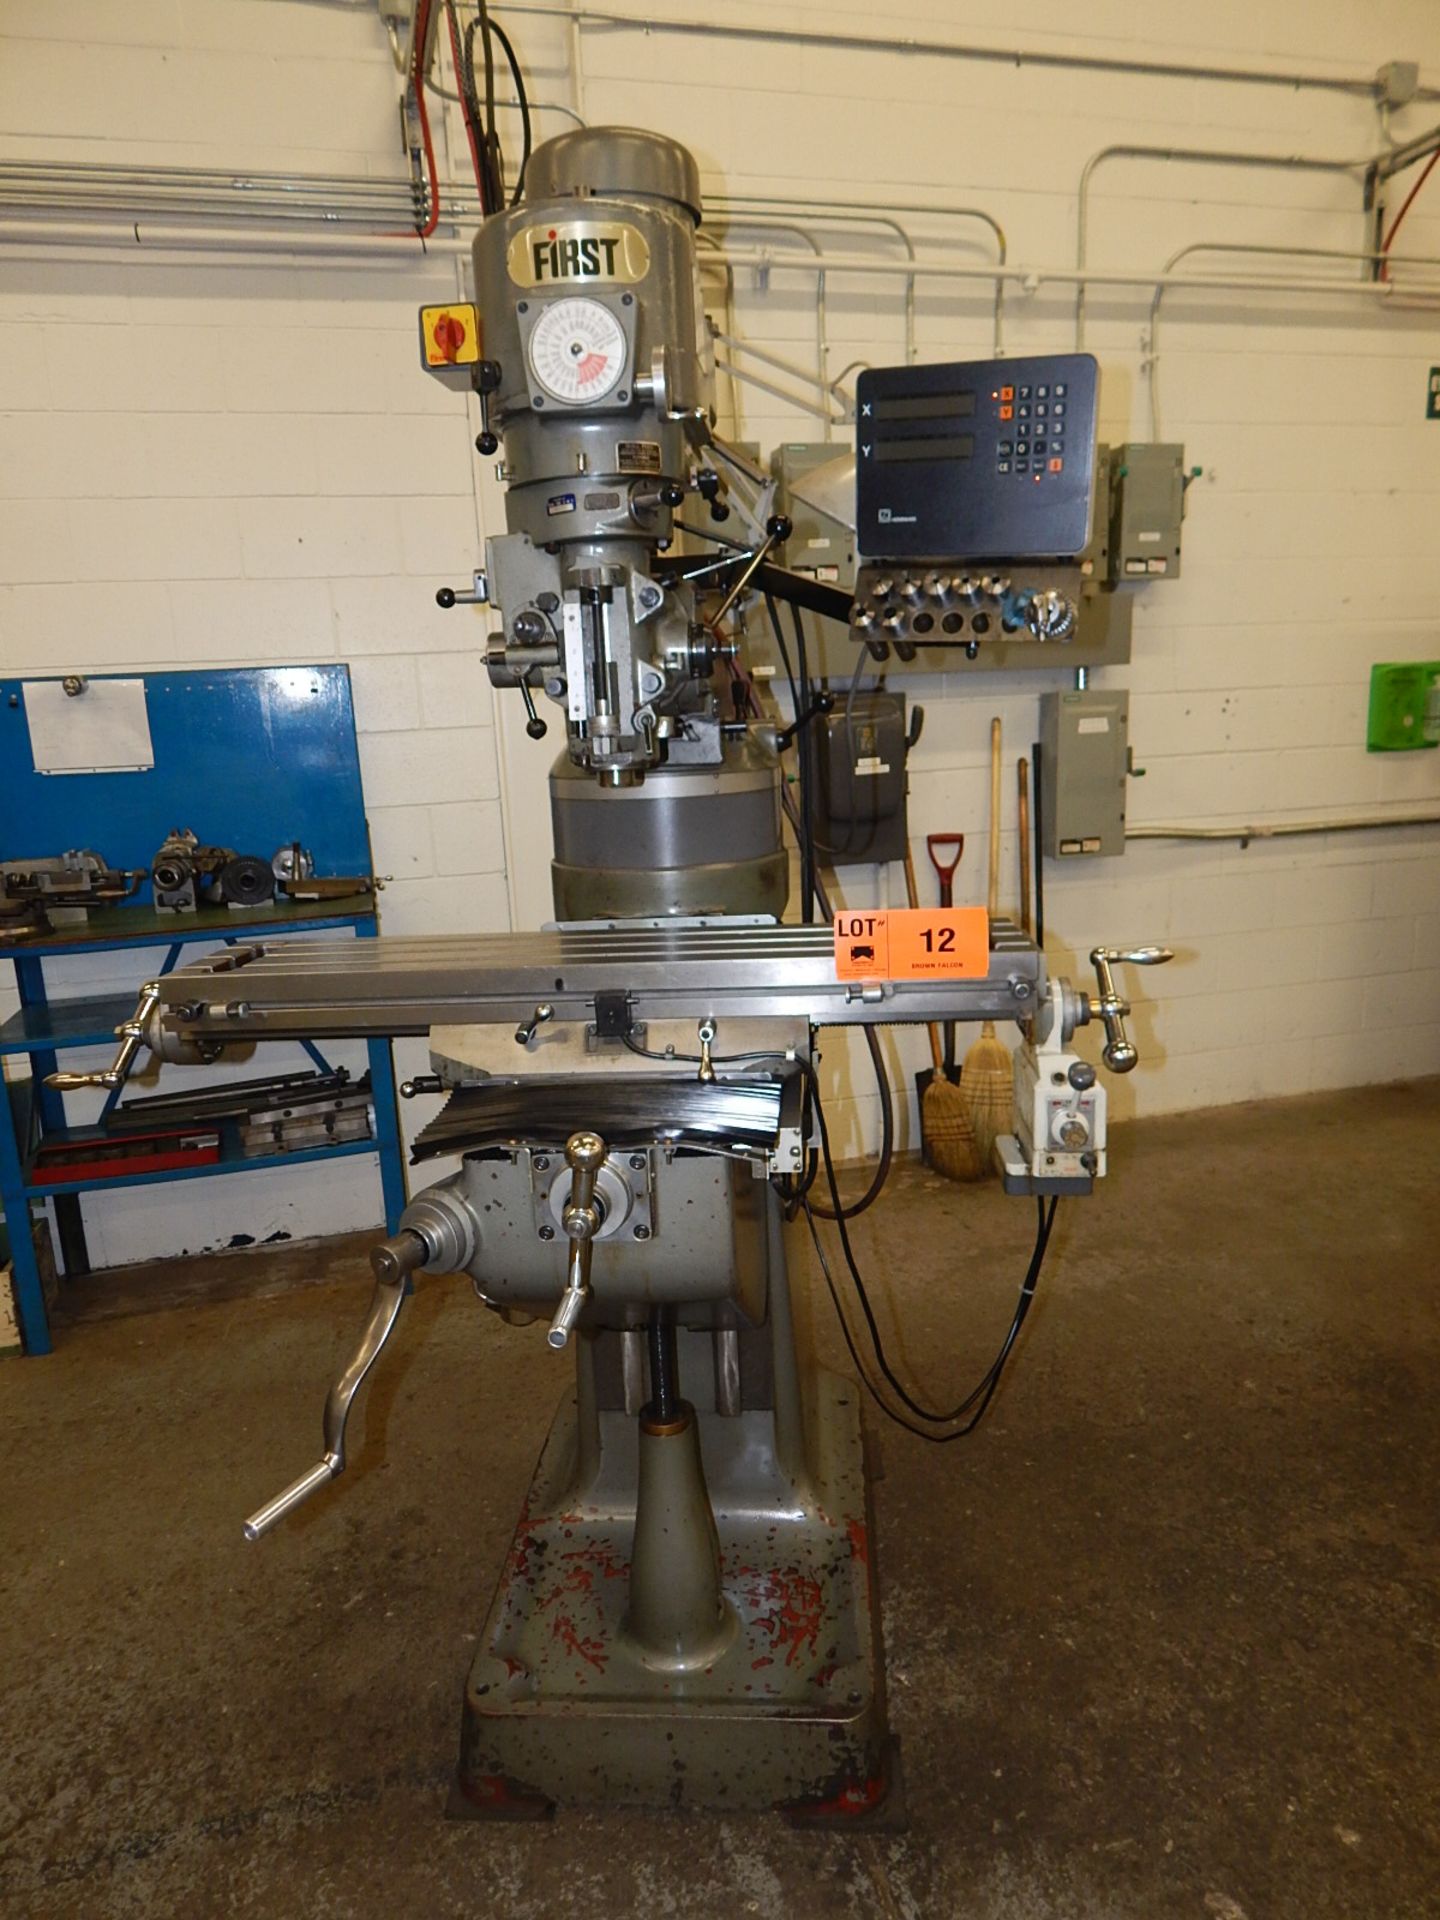 FIRST TURRET MILLING MACHINE WITH SPEEDS TO 4500 RPM, 36" X 9" T-SLOT TABLE WITH POWER FEED CONTROL, - Image 2 of 4